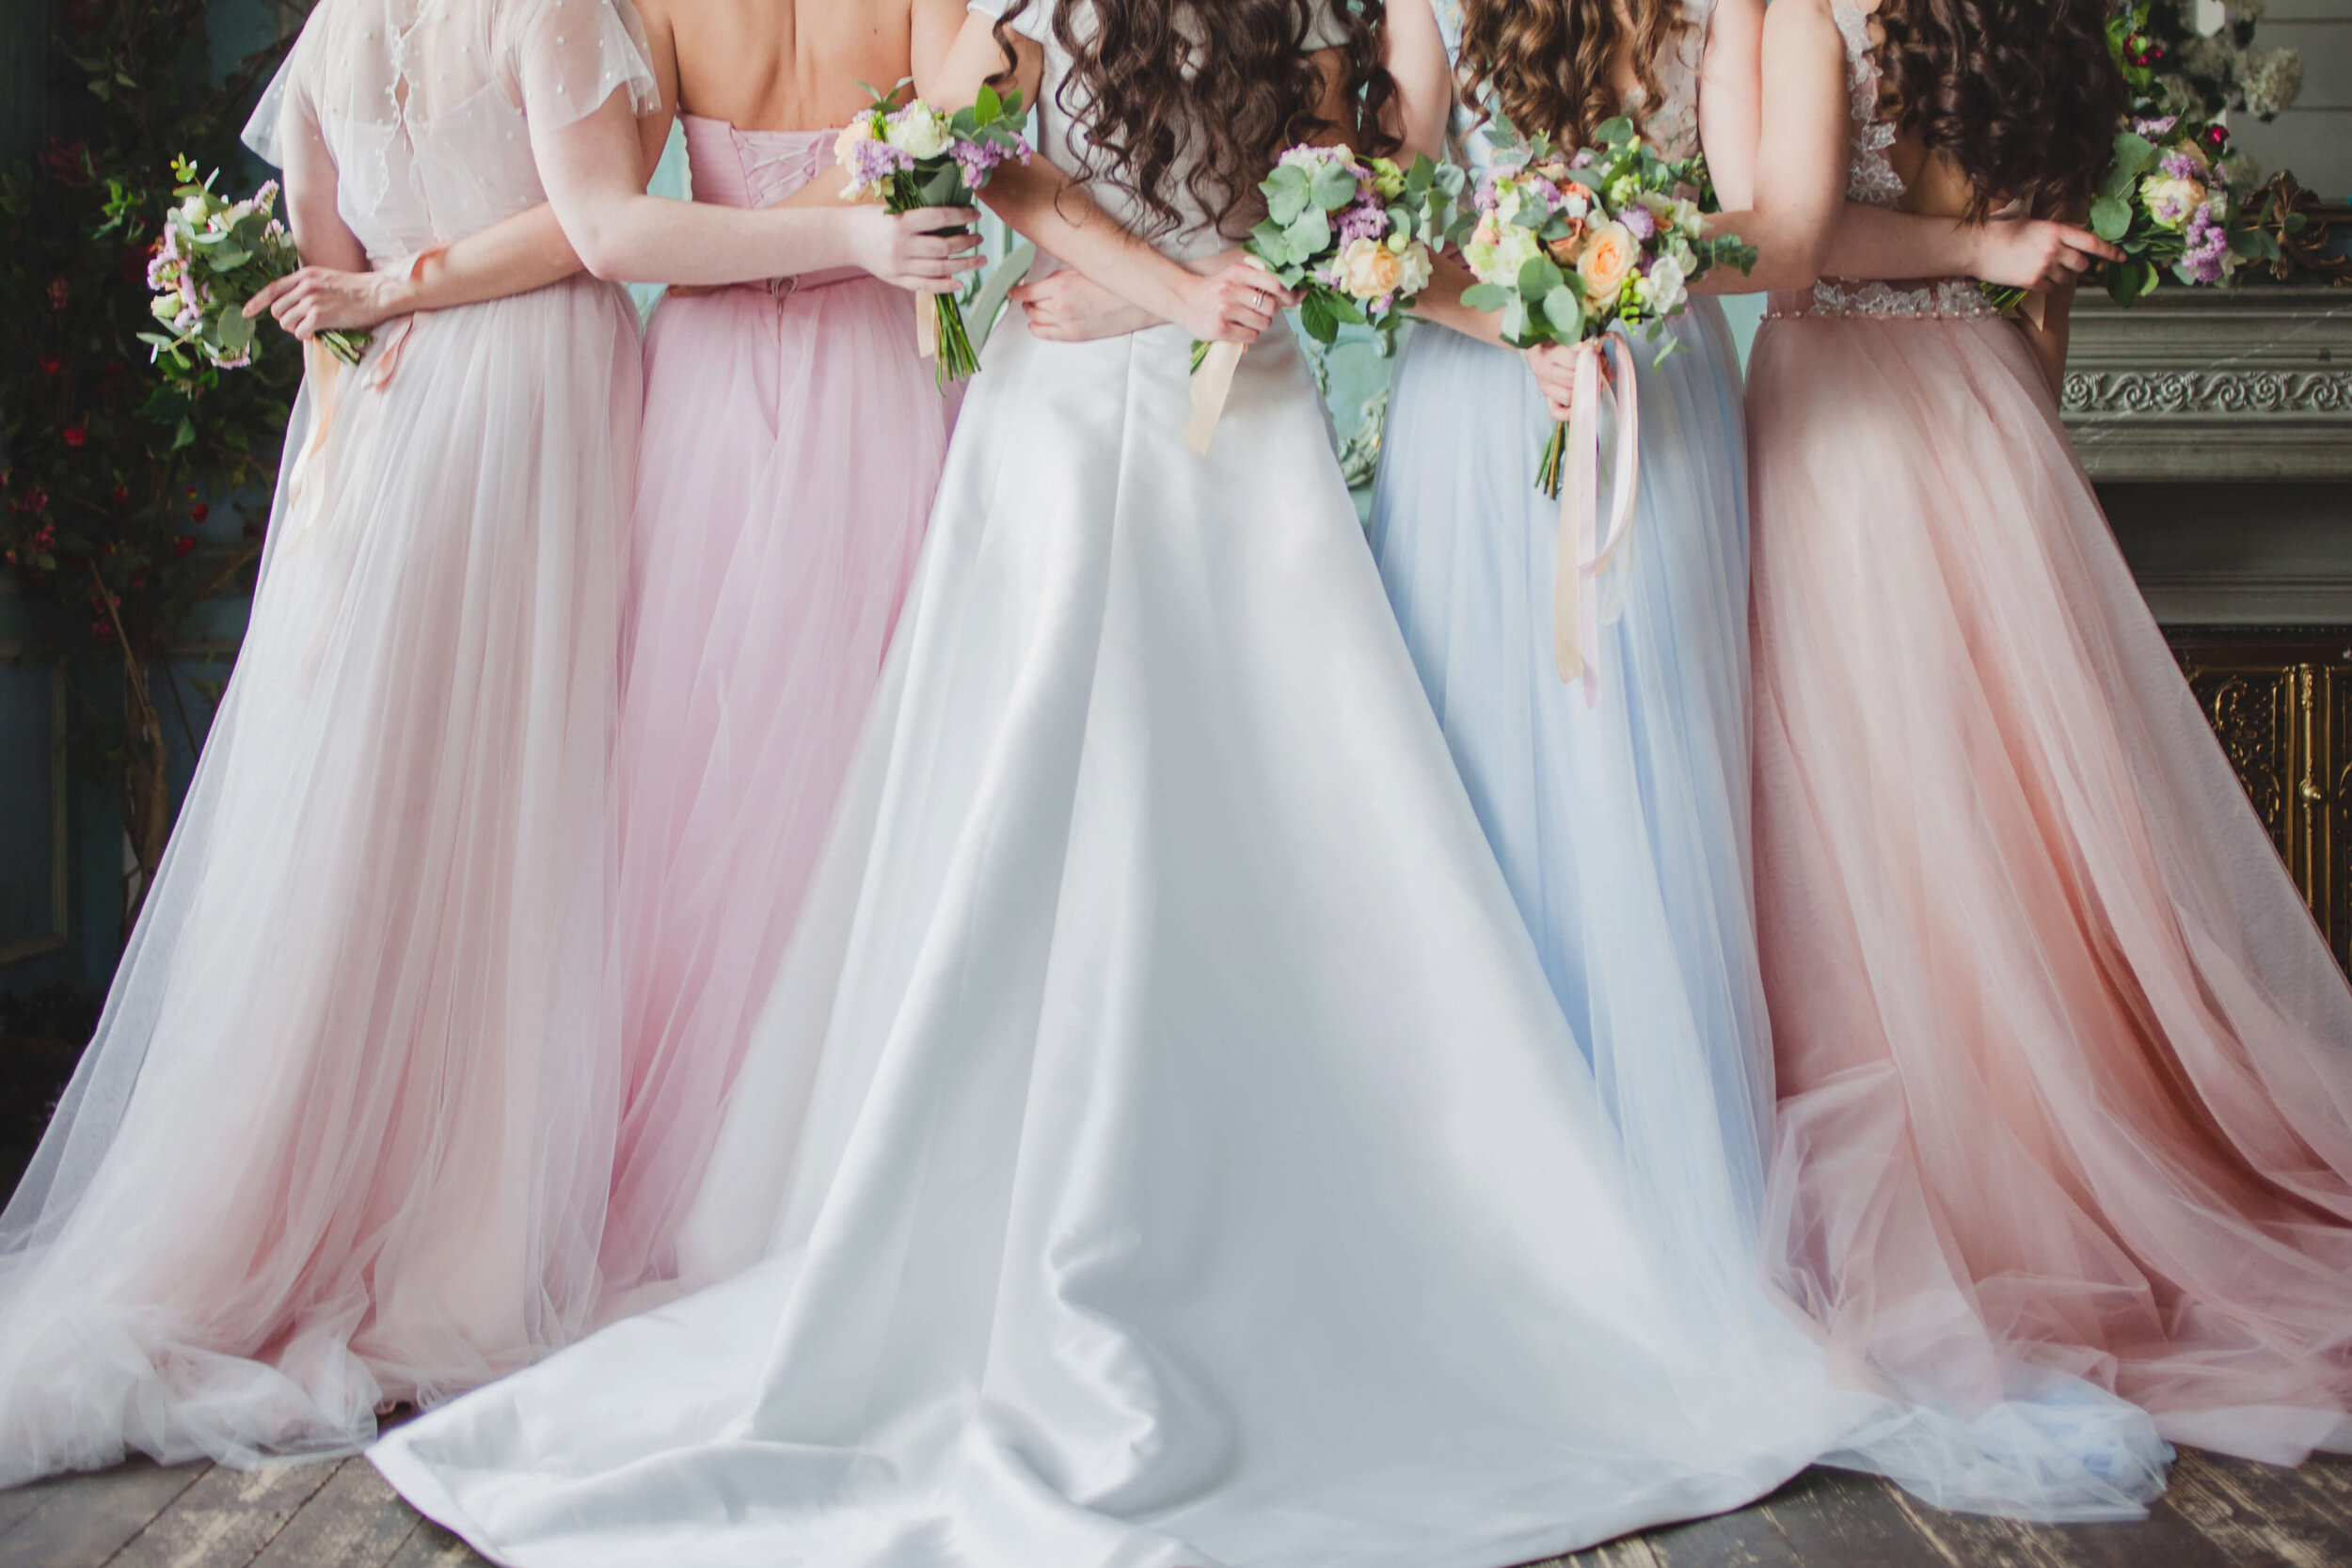 How to Find the Right Shapewear for Your Bridesmaid or Wedding